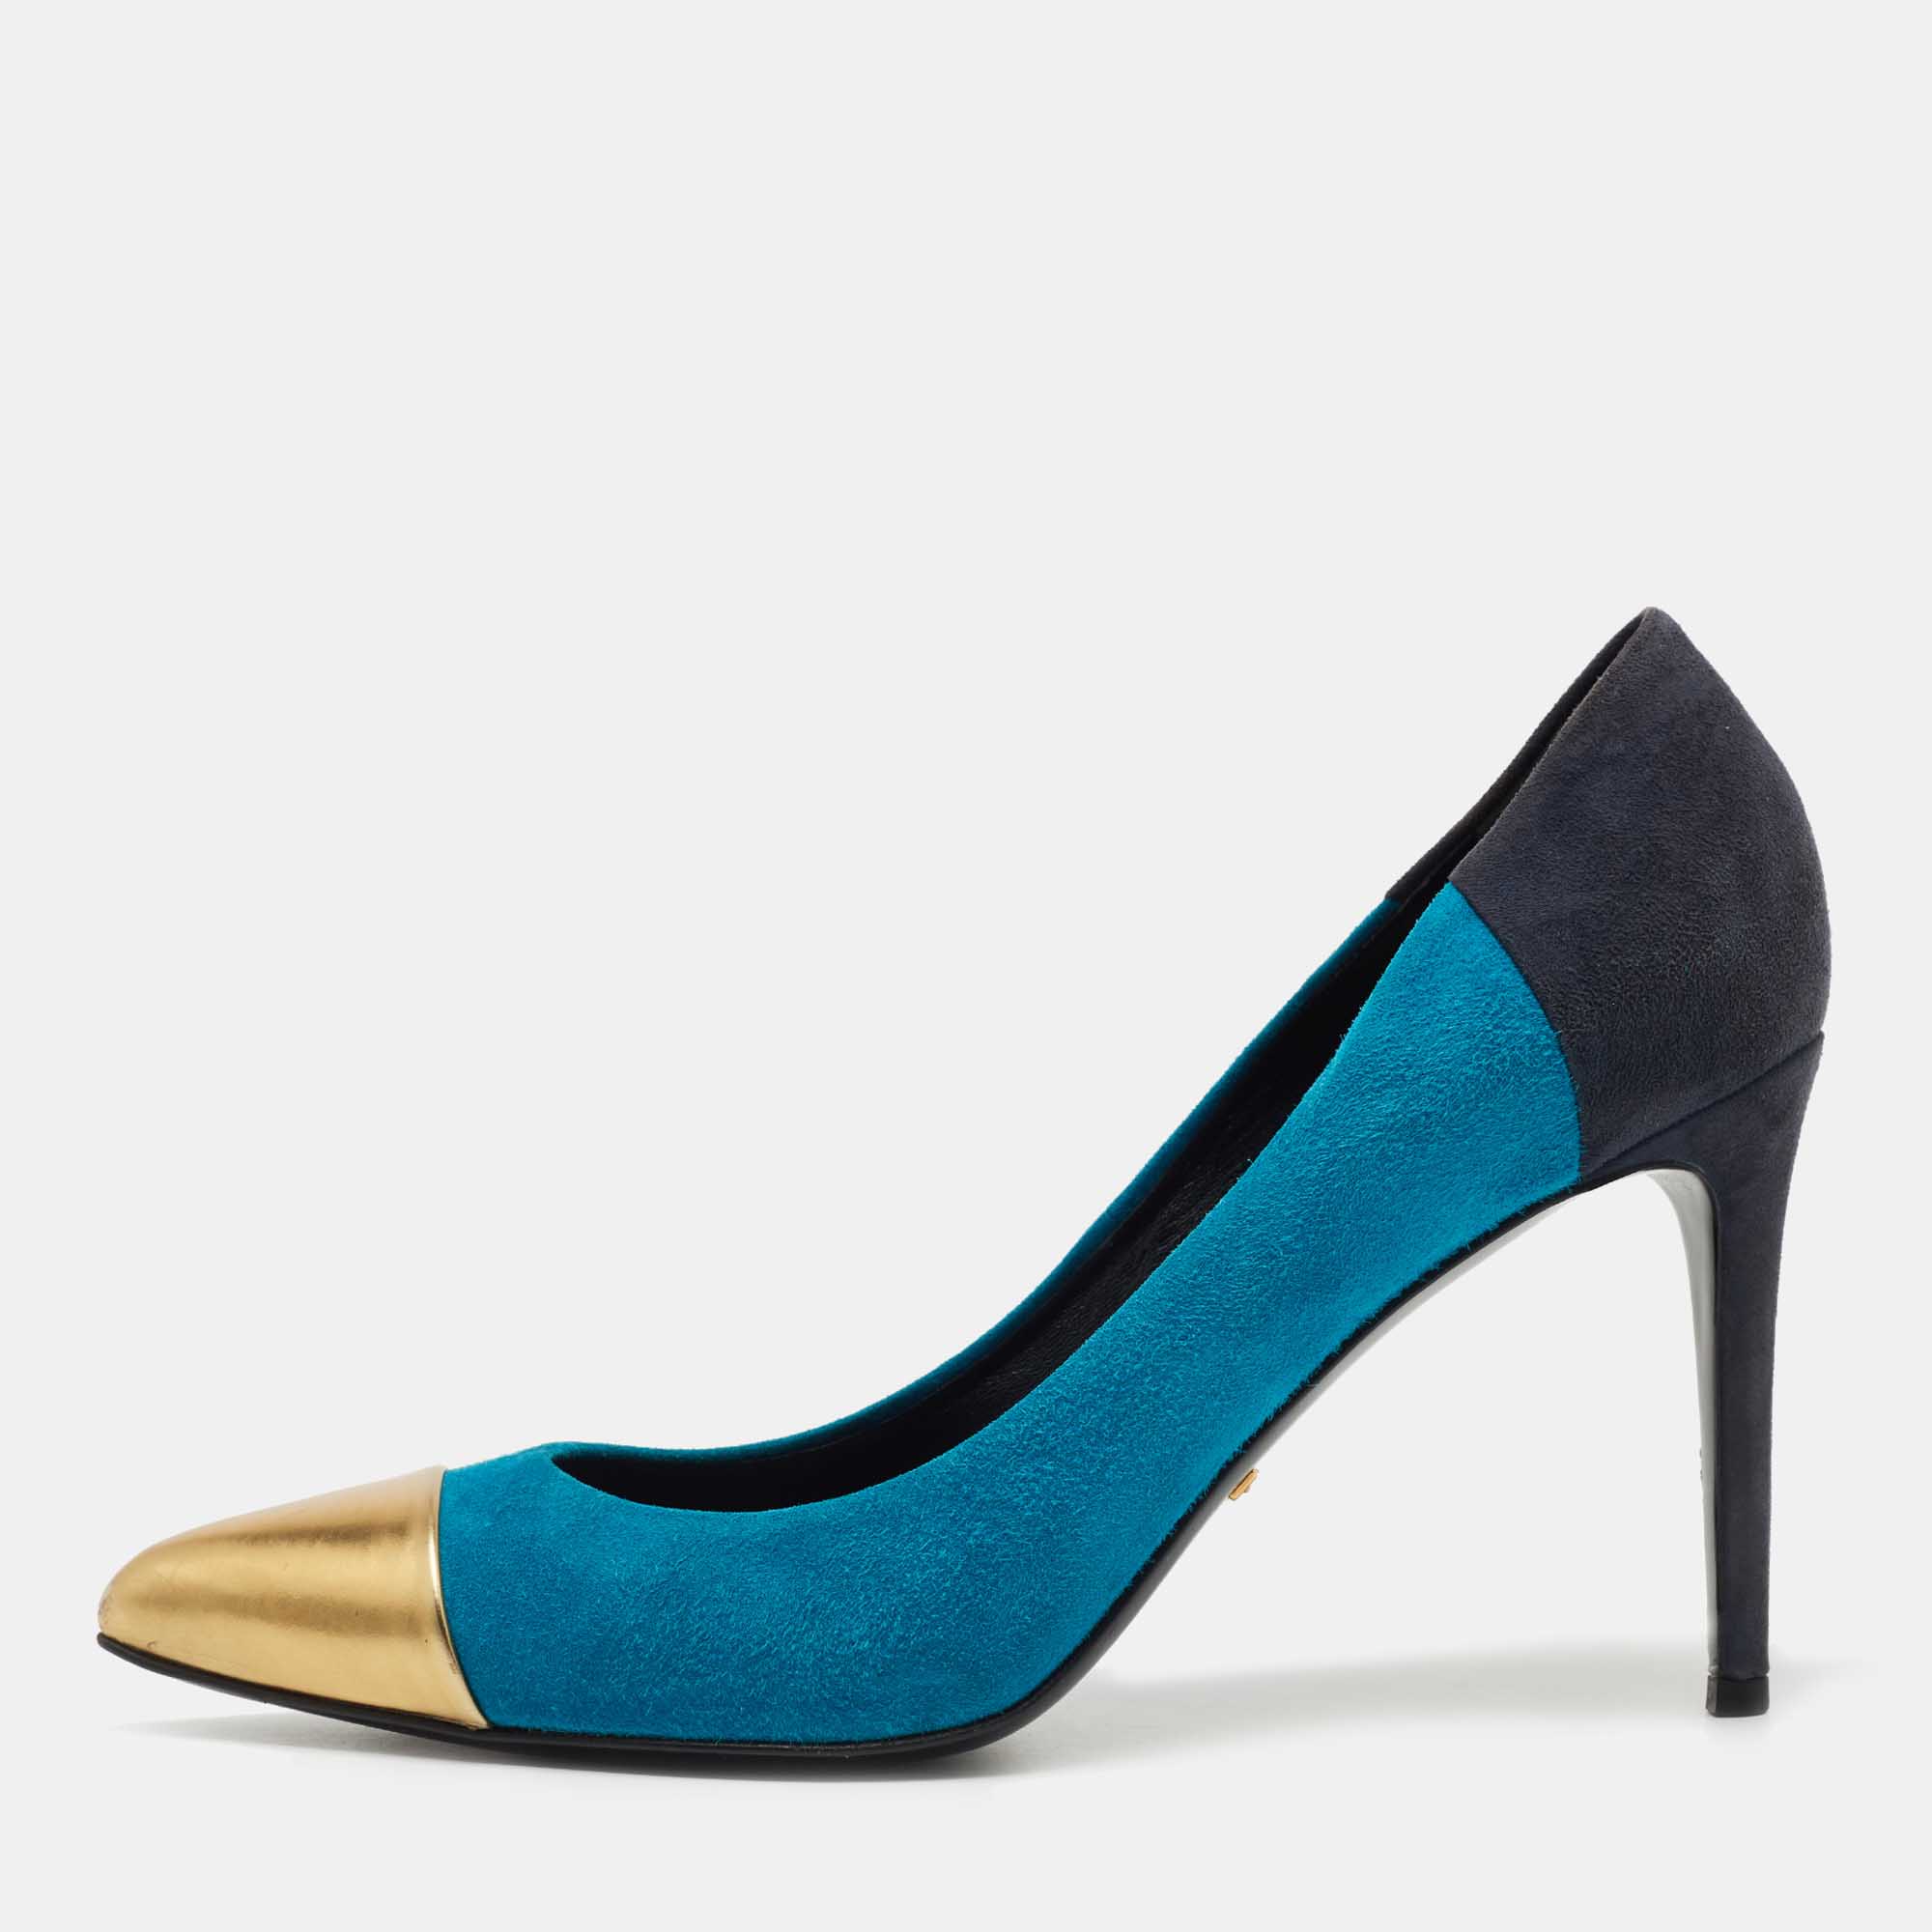 

Gucci Tricolor Suede and Leather Pointed Cap Toe Pumps Size, Blue